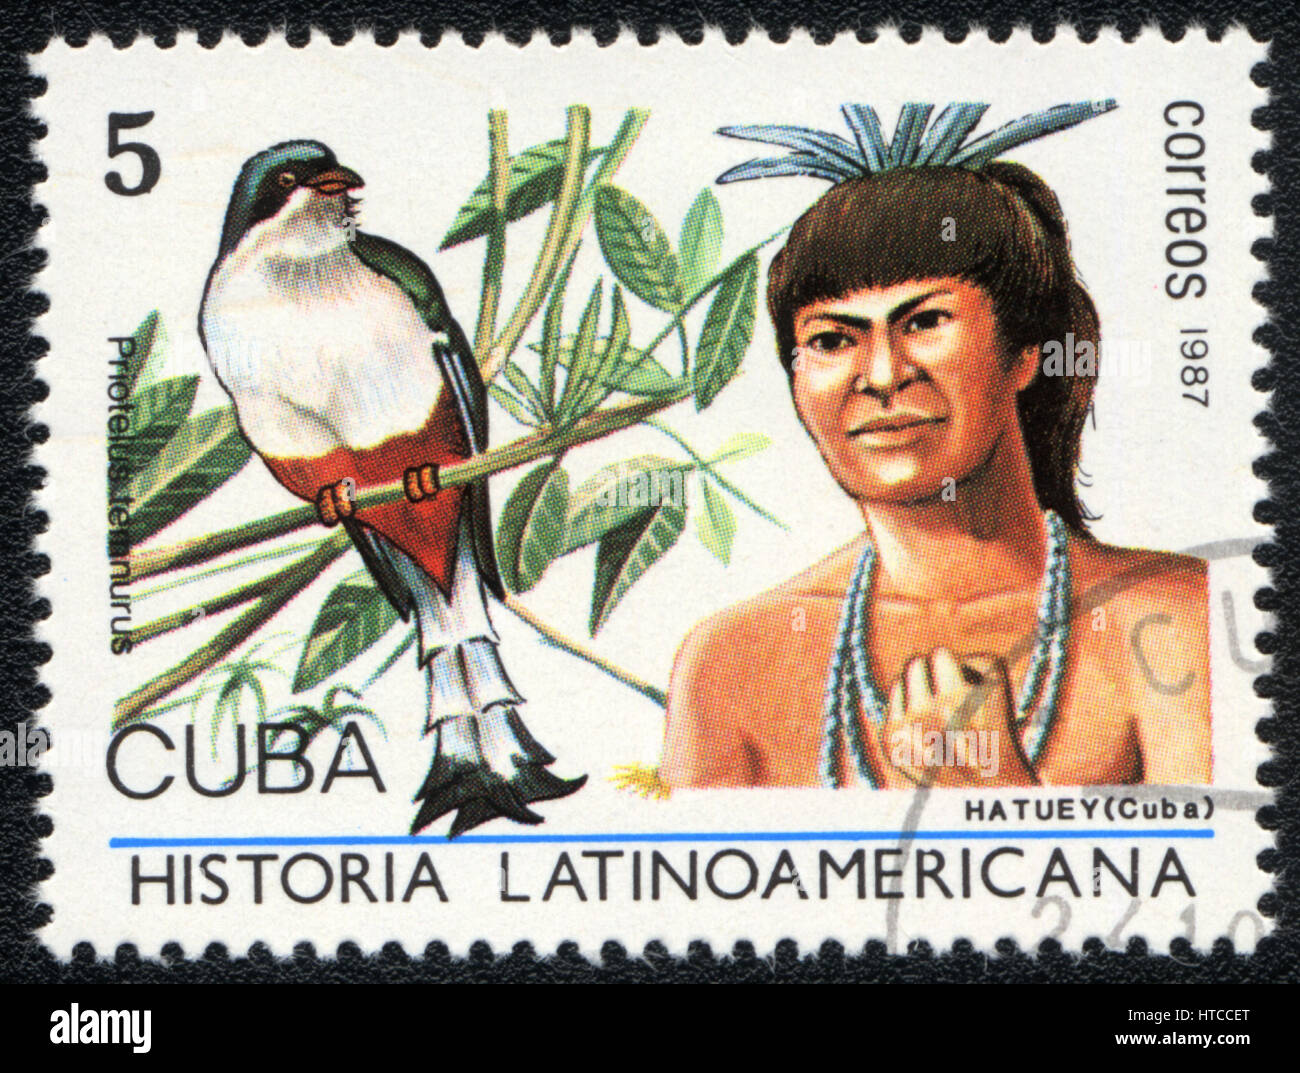 A postage stamp printed in Cuba shows image of a   hatuey (Cuba) and priotelus temnurus, from series Historia Latinoavericana, circa 1987 Stock Photo